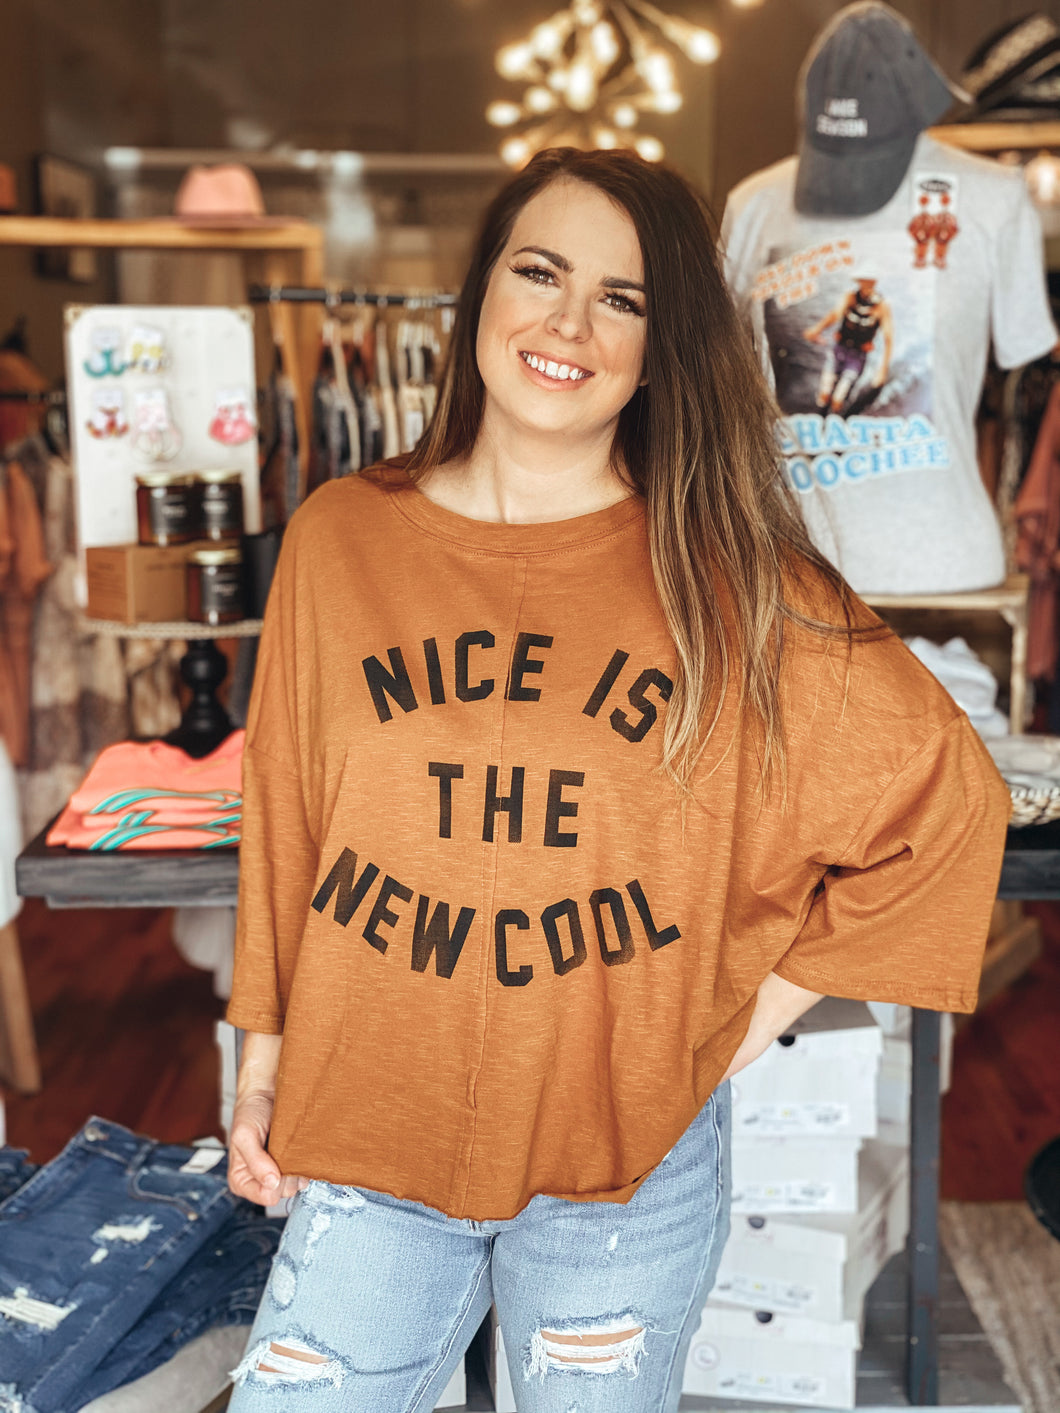 Nice is the new cool